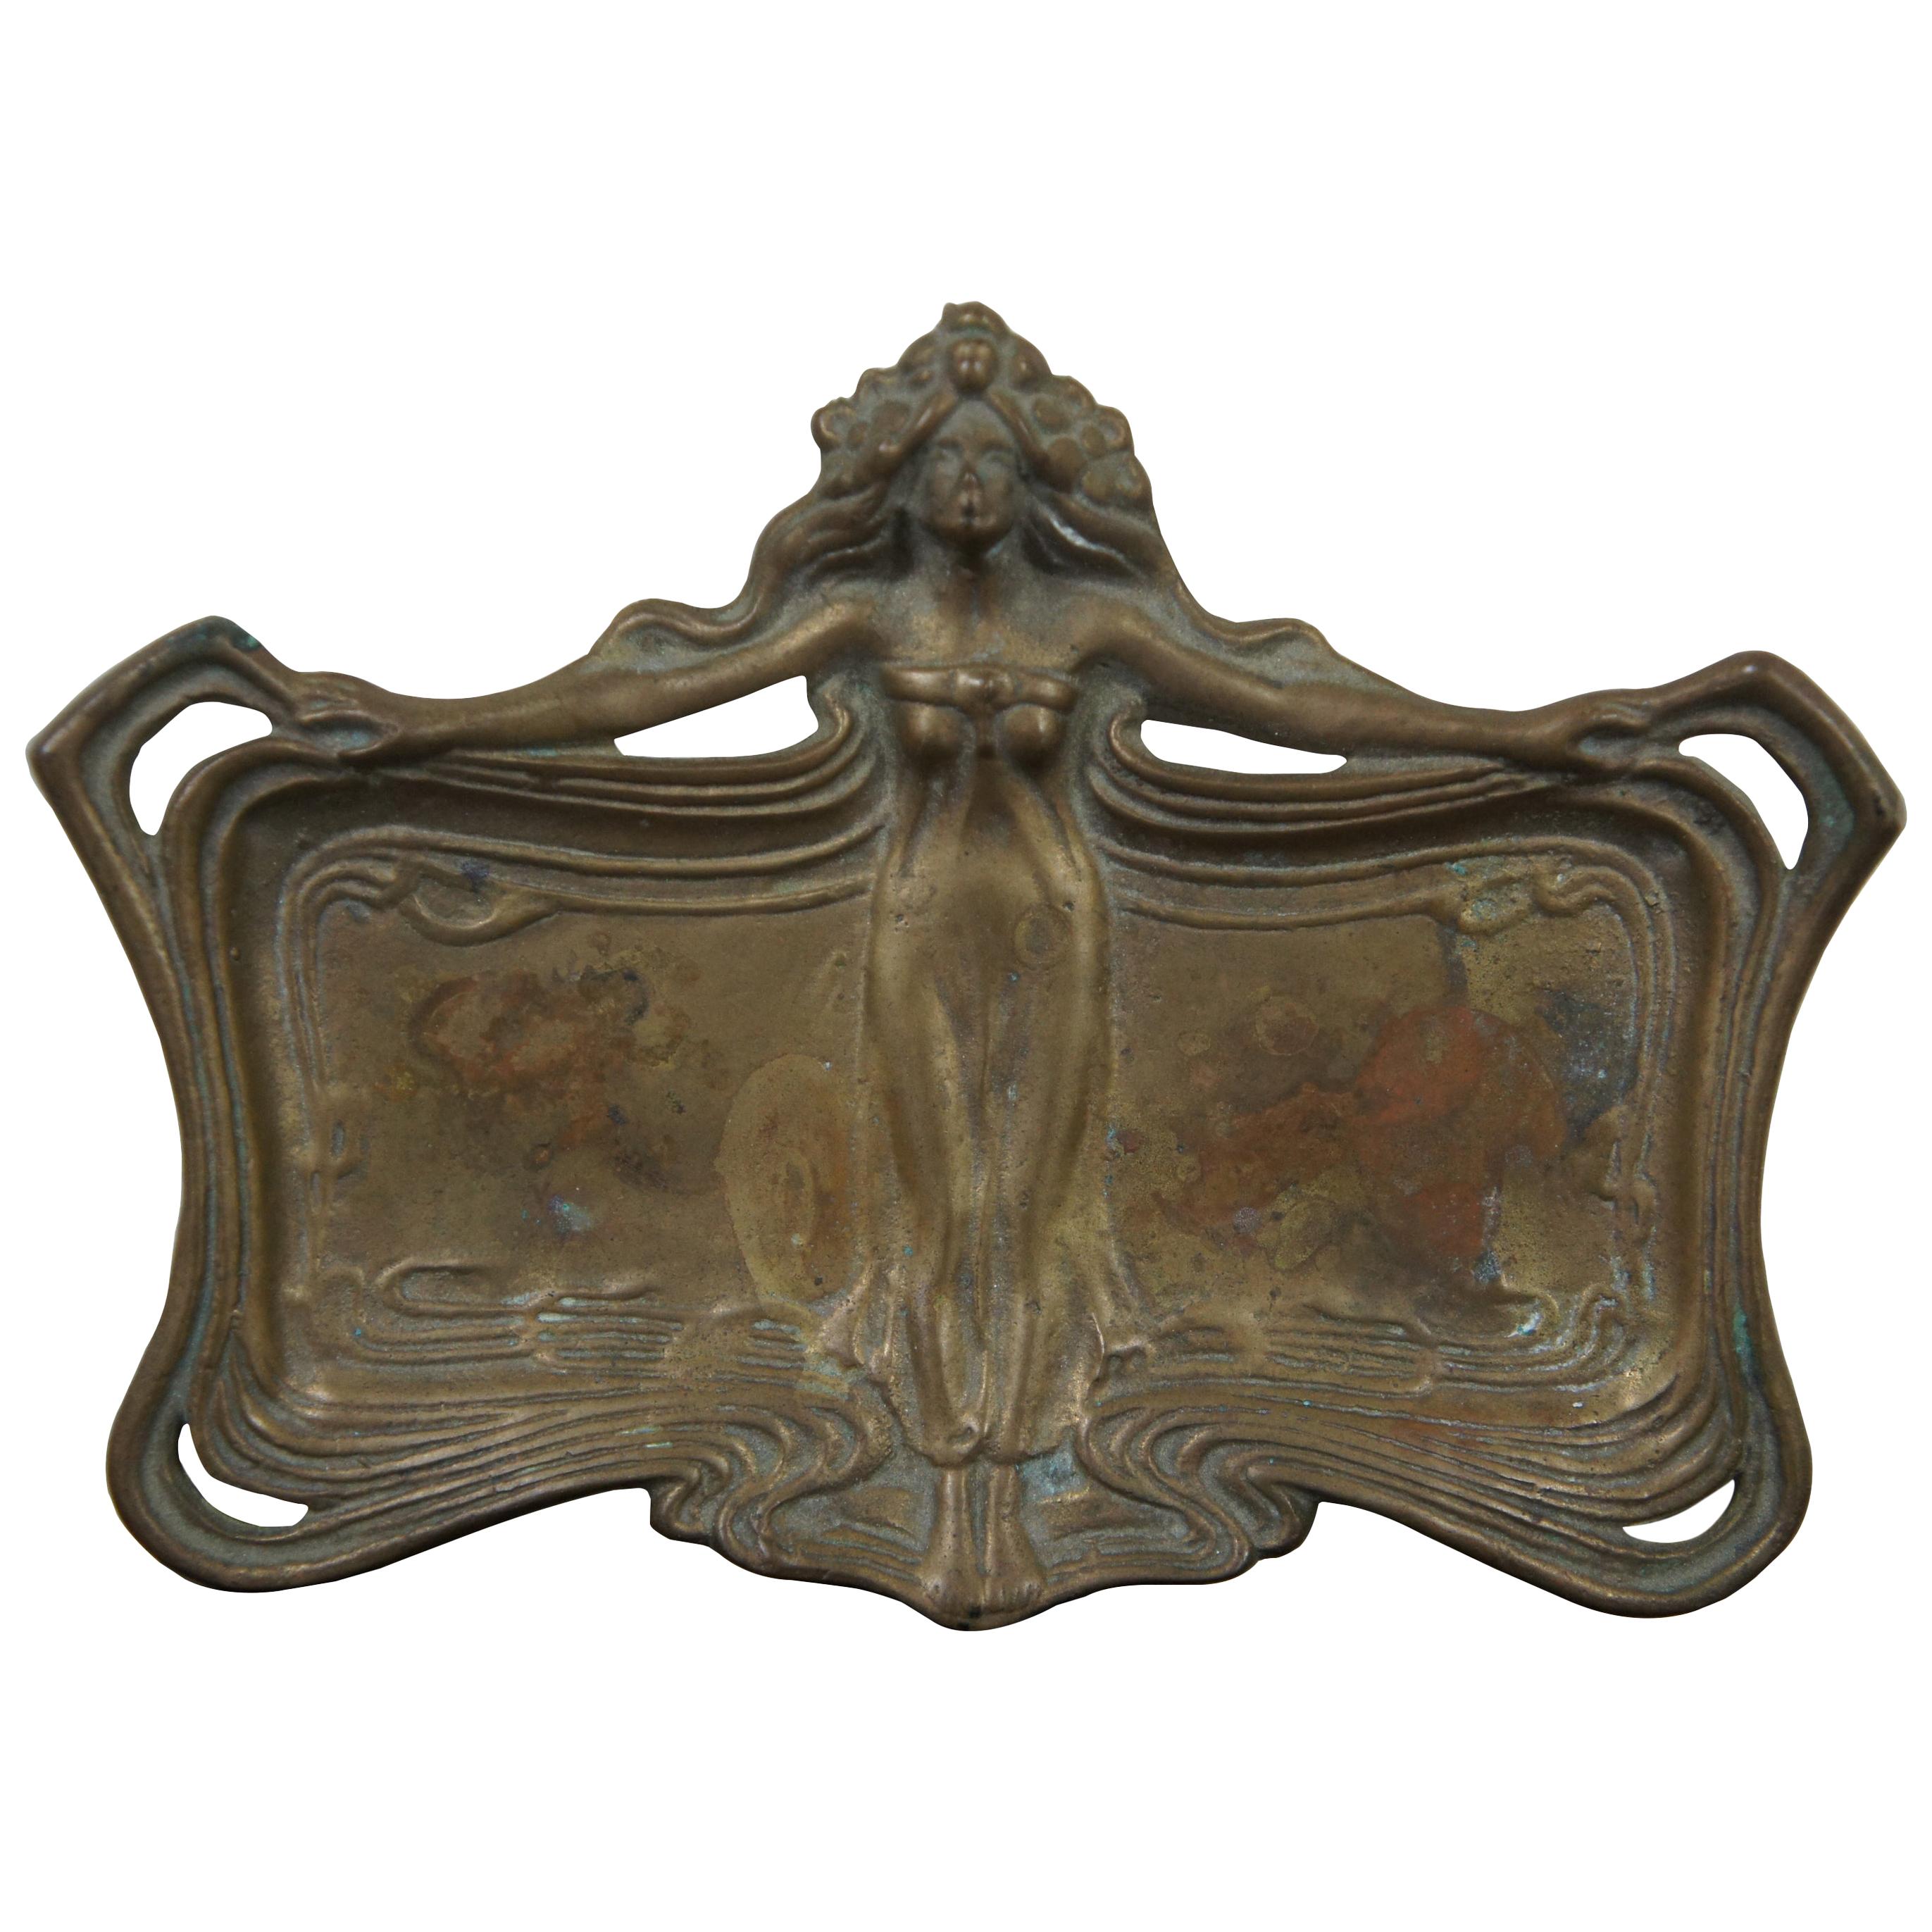 Francis Renaud French Bronze Art Nouveau Figural Tray Vanity Dish Nymph Maiden